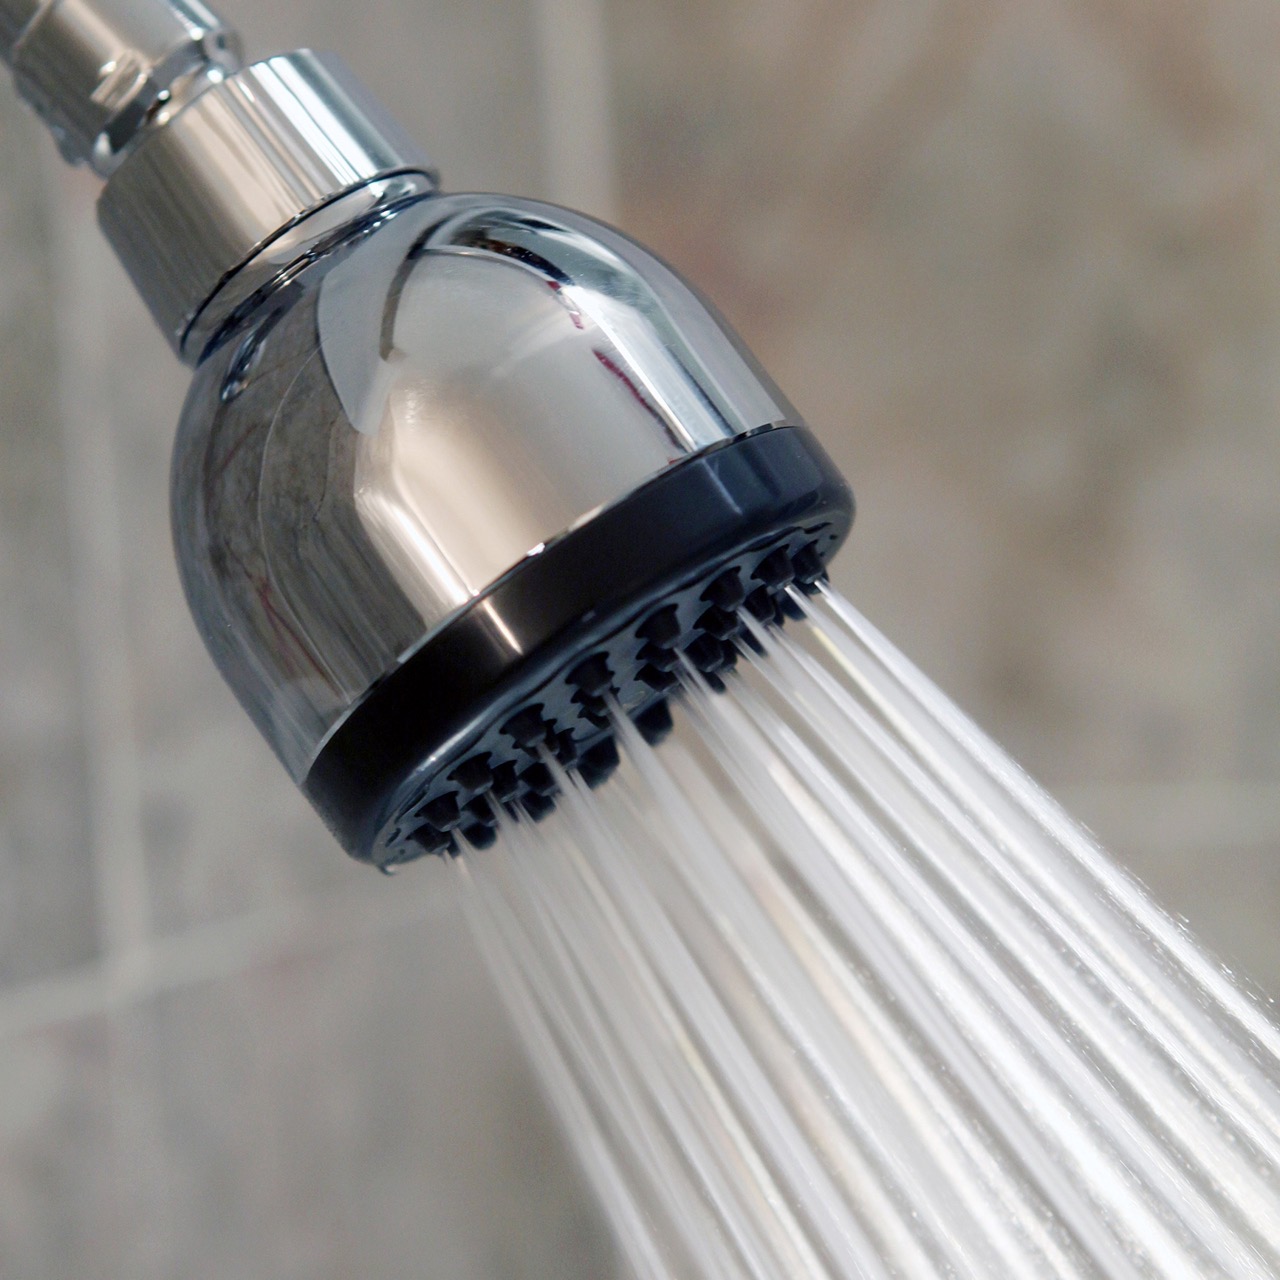 What Is The Appropriate PSI For A Showerhead